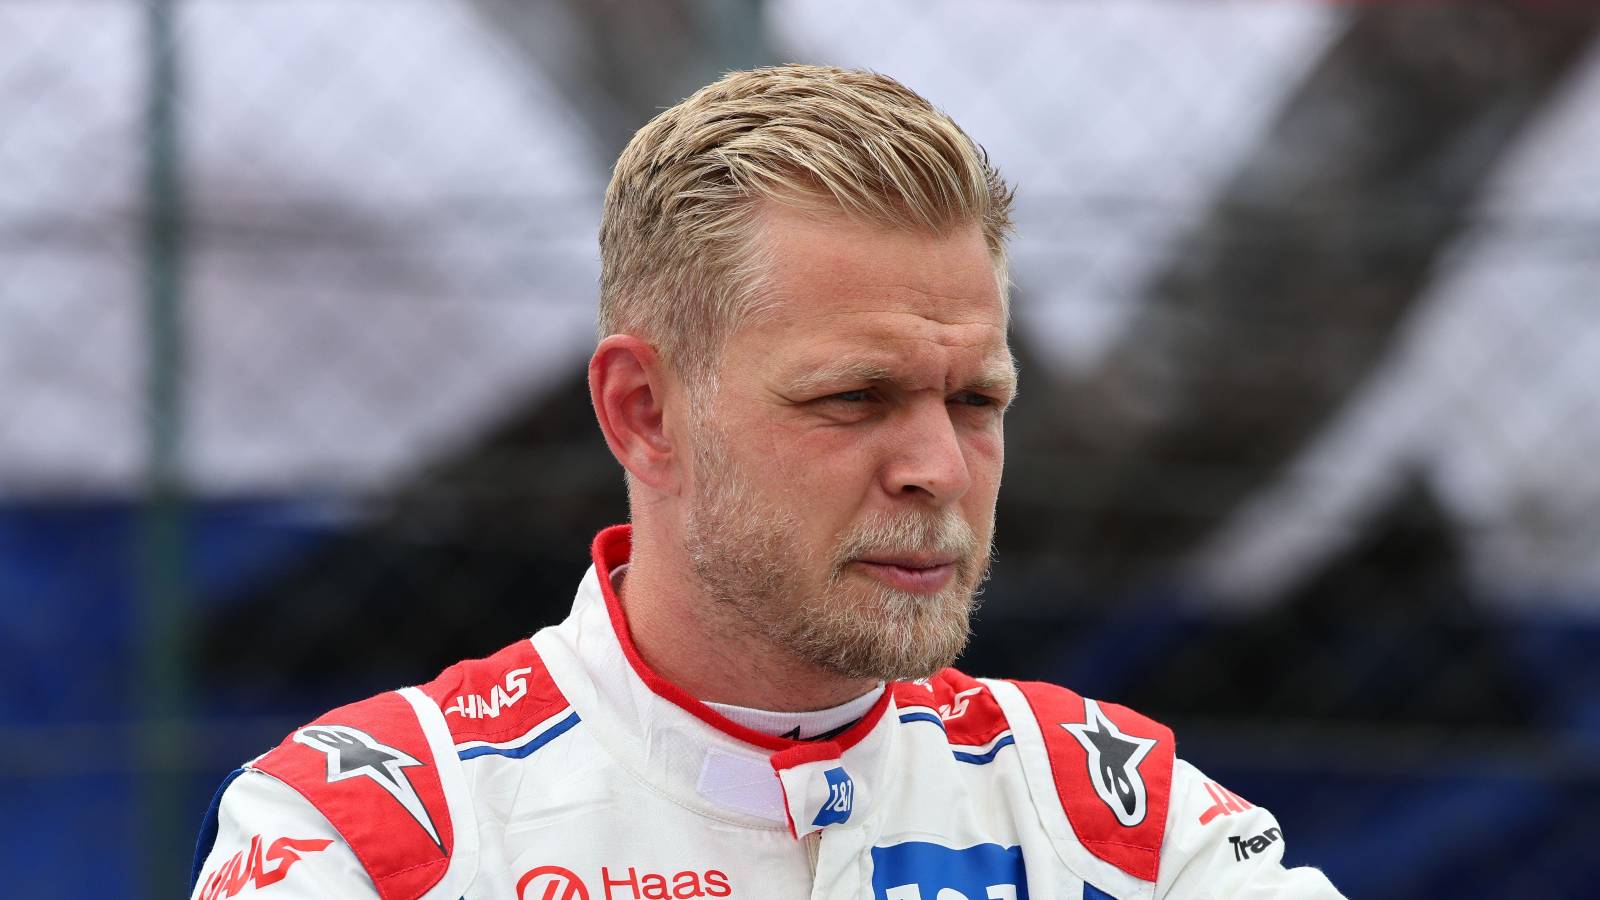 Magnussen's Approach to the Looming 11-Month F1 Ban Threat